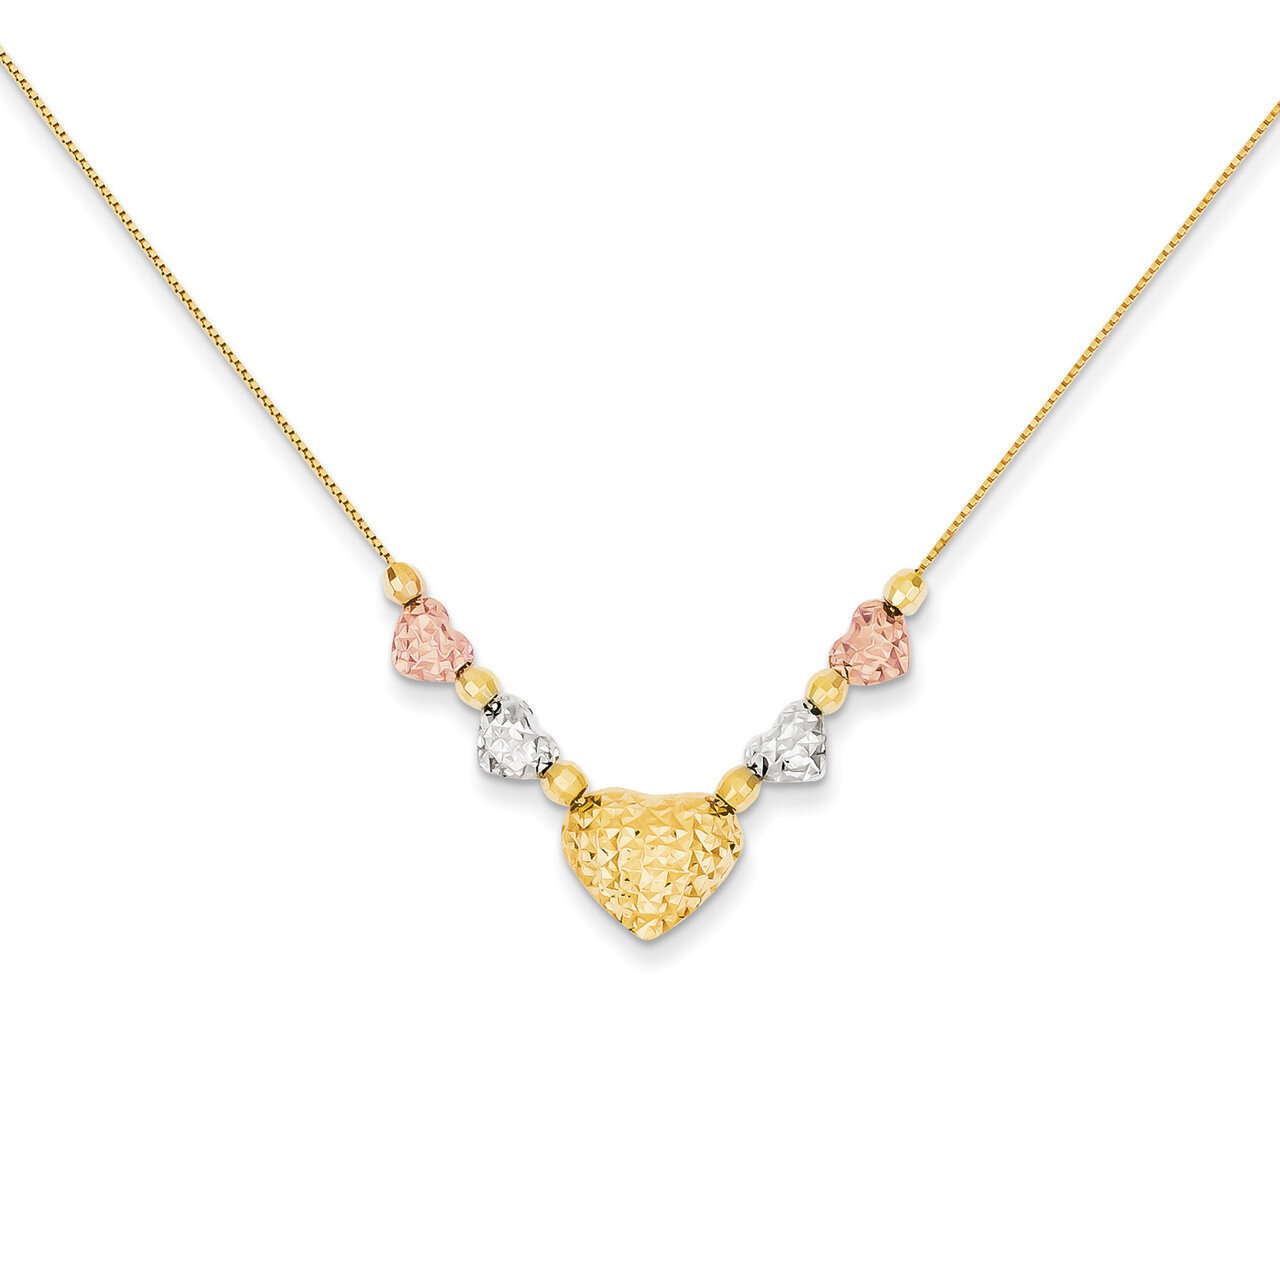 Tri-color Puff & Flat Hearts Necklace 14k Gold SF1878-18